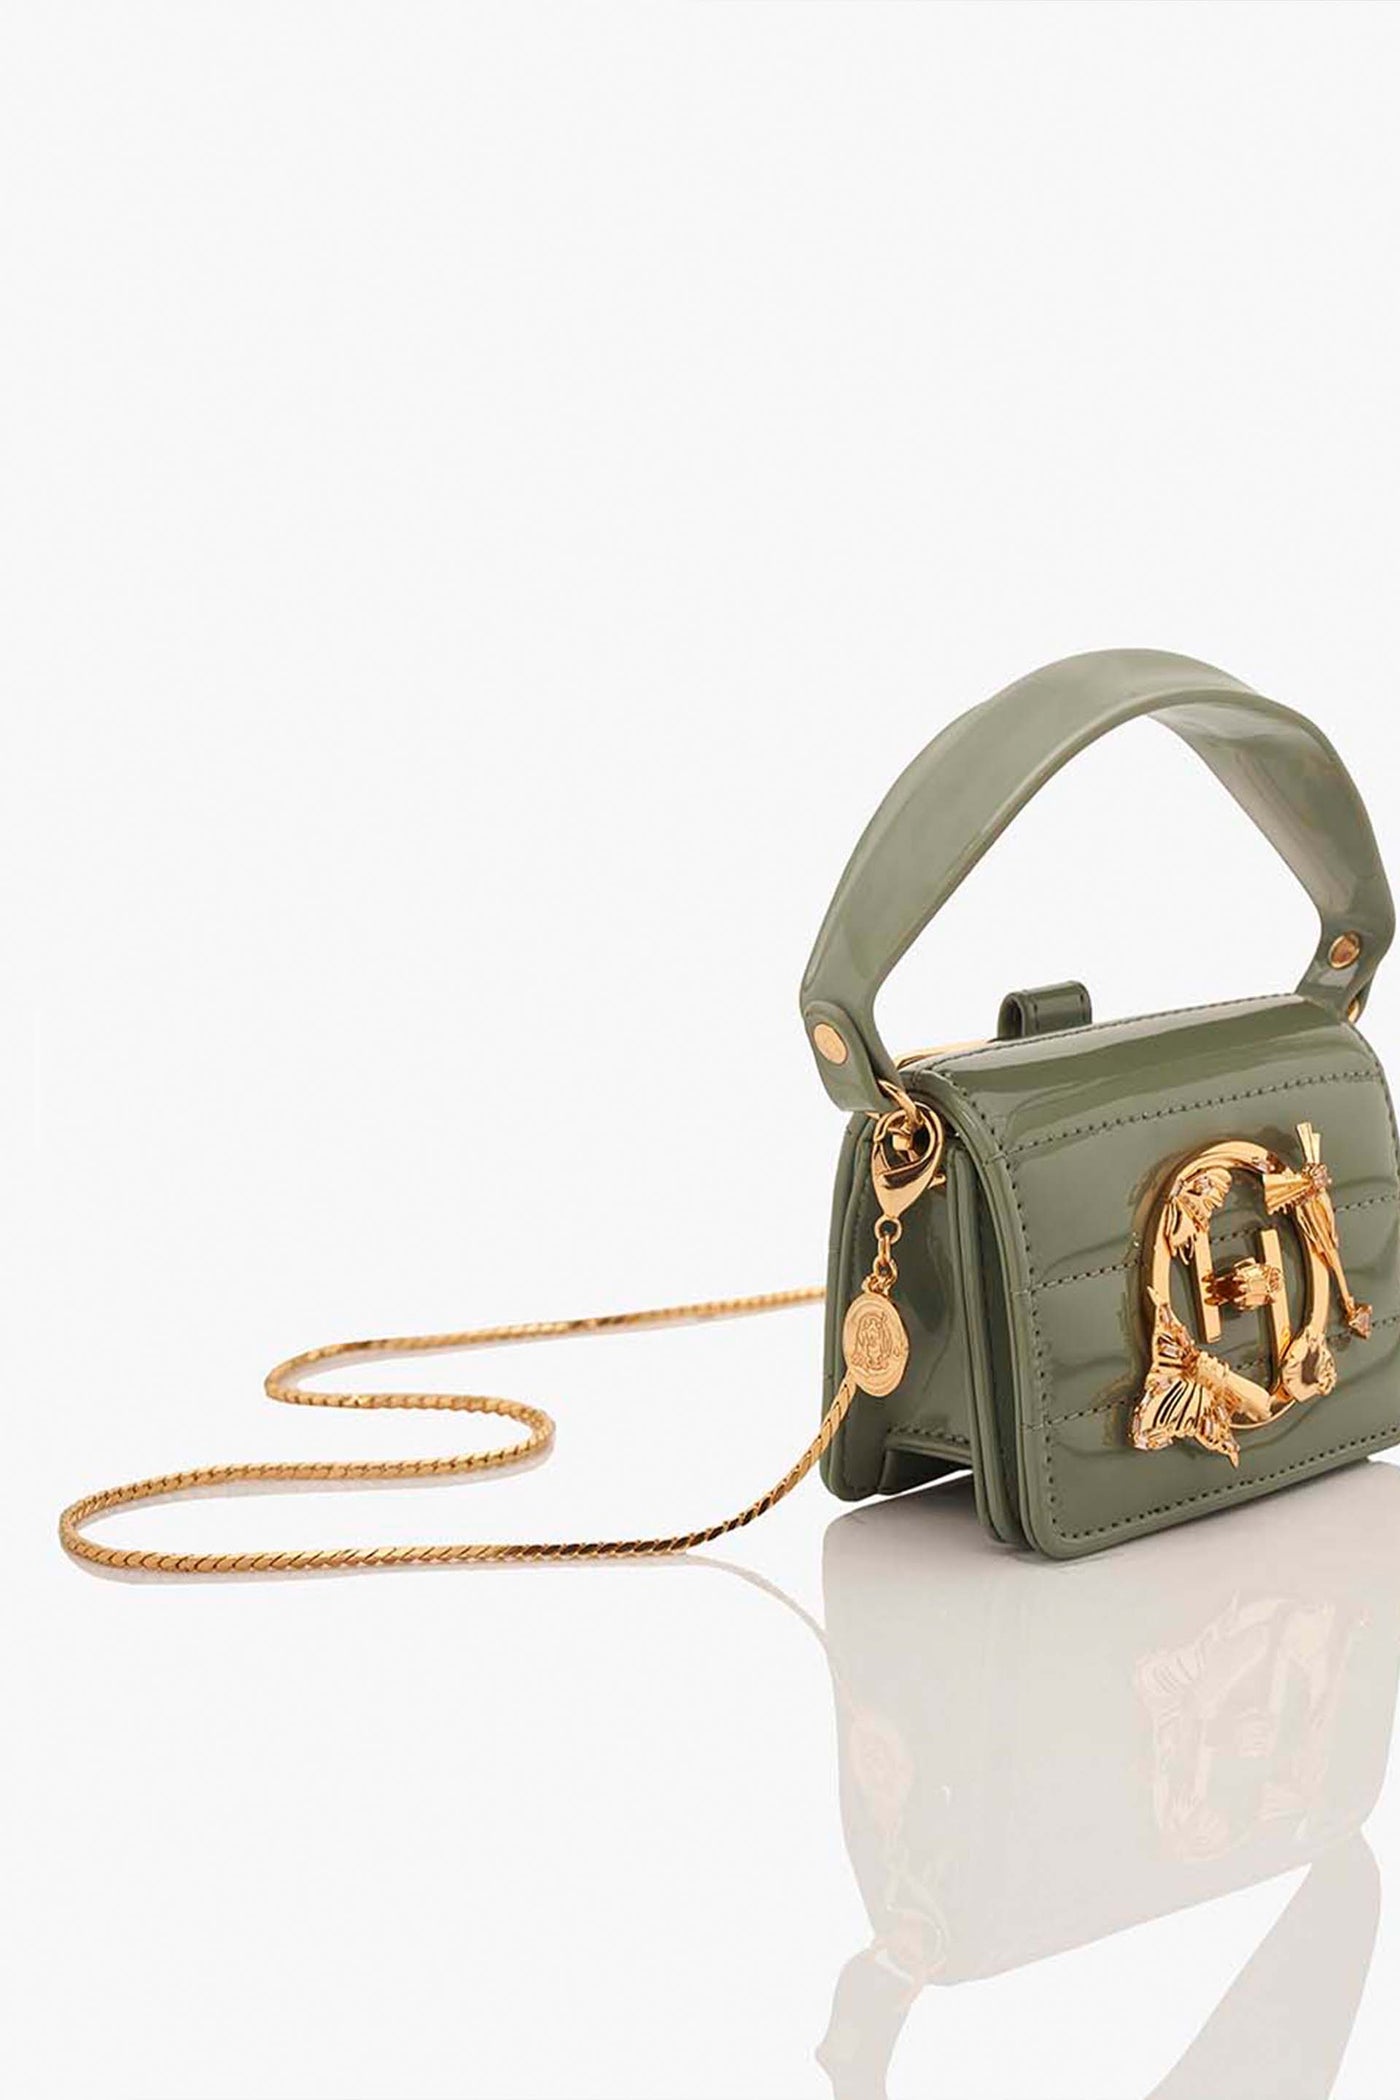 Outhouse Oh V Furbie In Olive accessories online shopping melange singapore indian designer wear